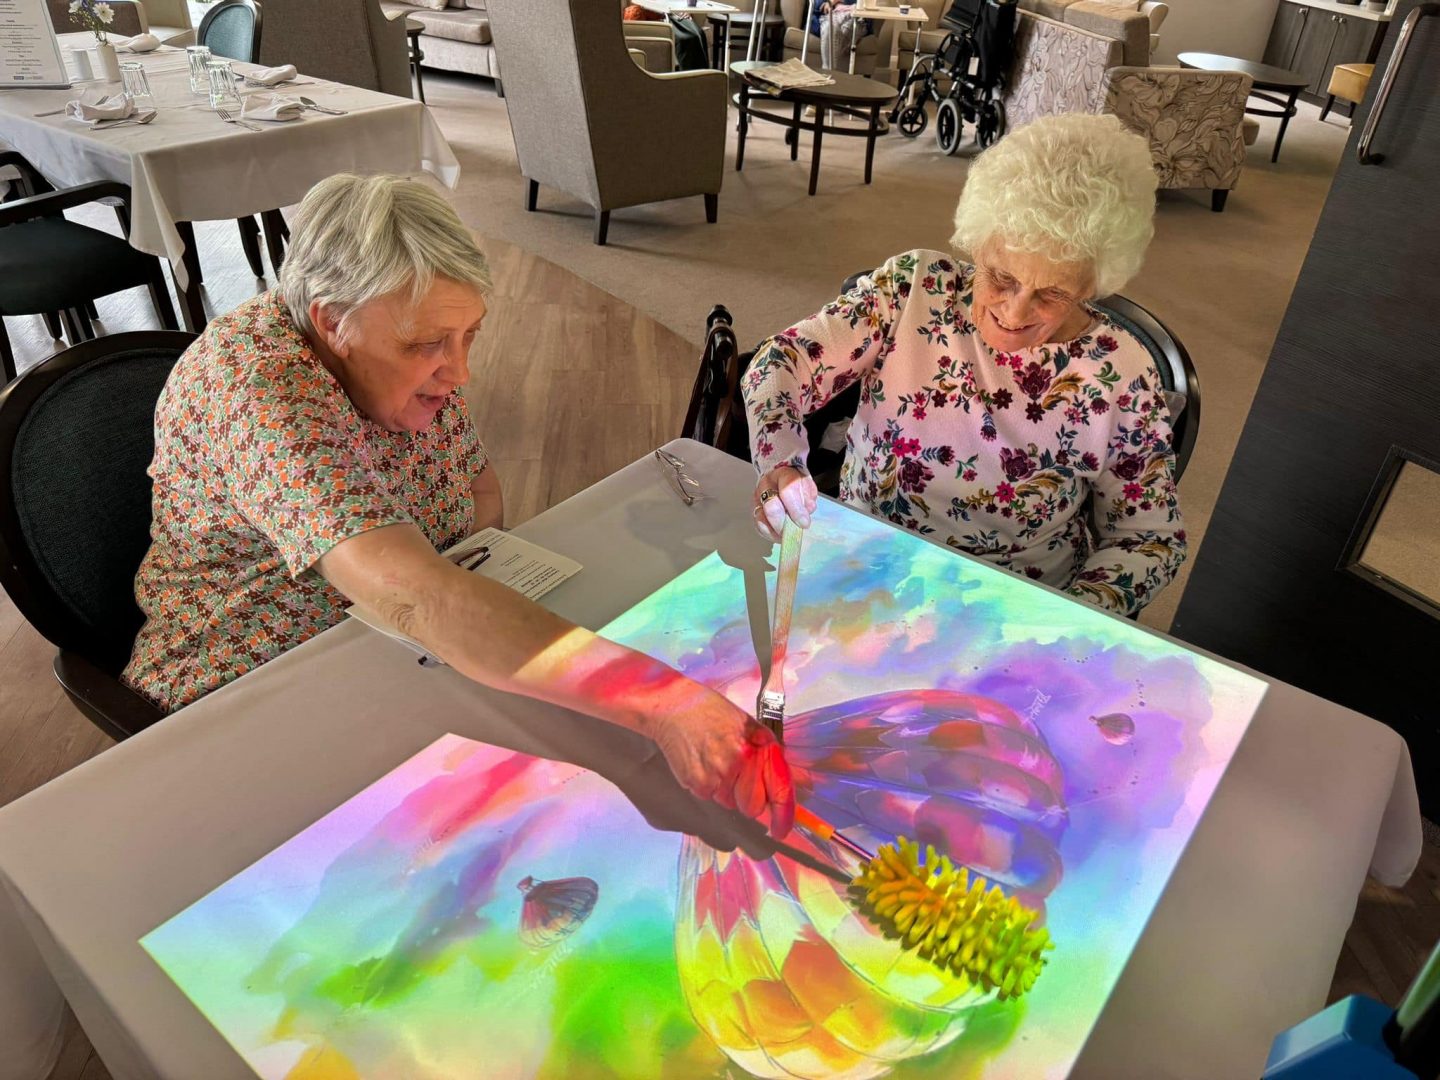 Two elderly ladies are enjoying a colouring in activity on the interactive projection table, the women are using dusters and paintbrushes to turn the image of the hot air balloon from black and white to a vibrant range of colours.